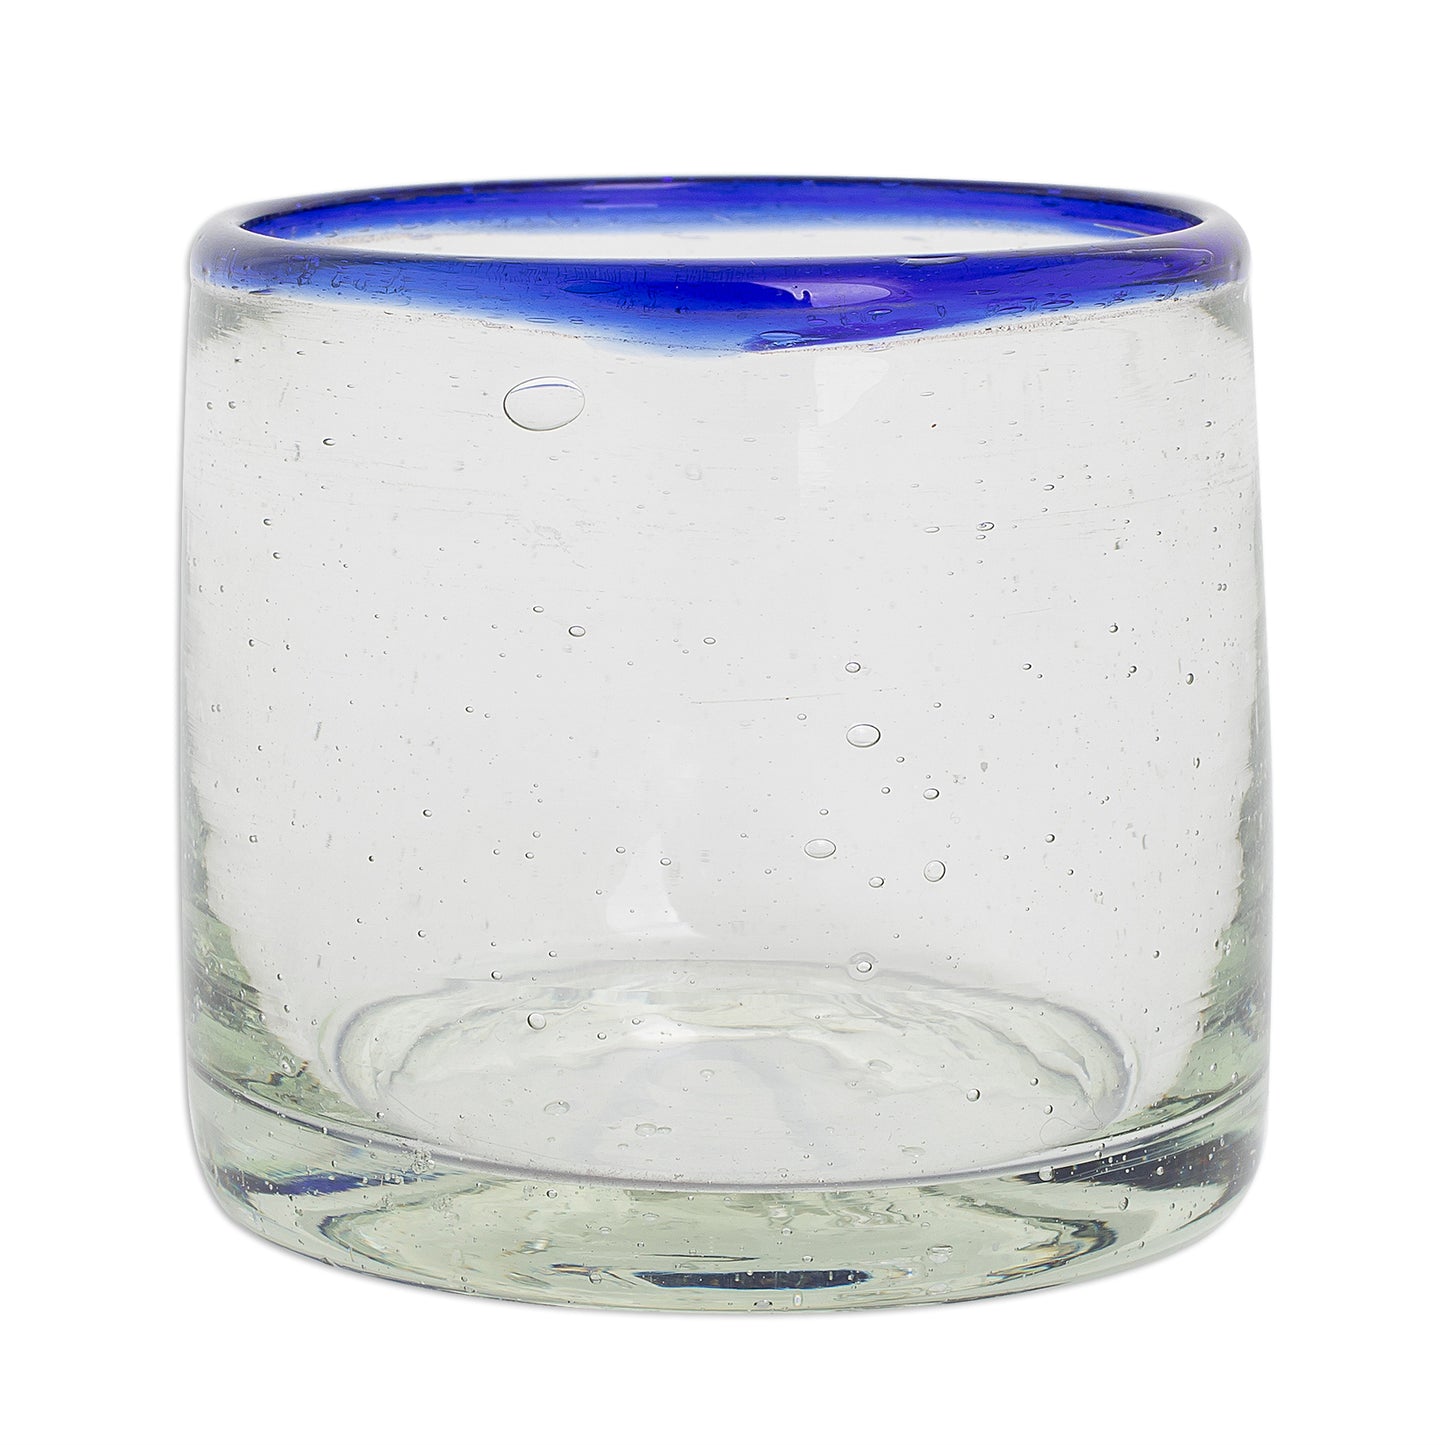 Ocean Rim Recycled Glass Juice Glasses with Blue Rims (Set of 4)